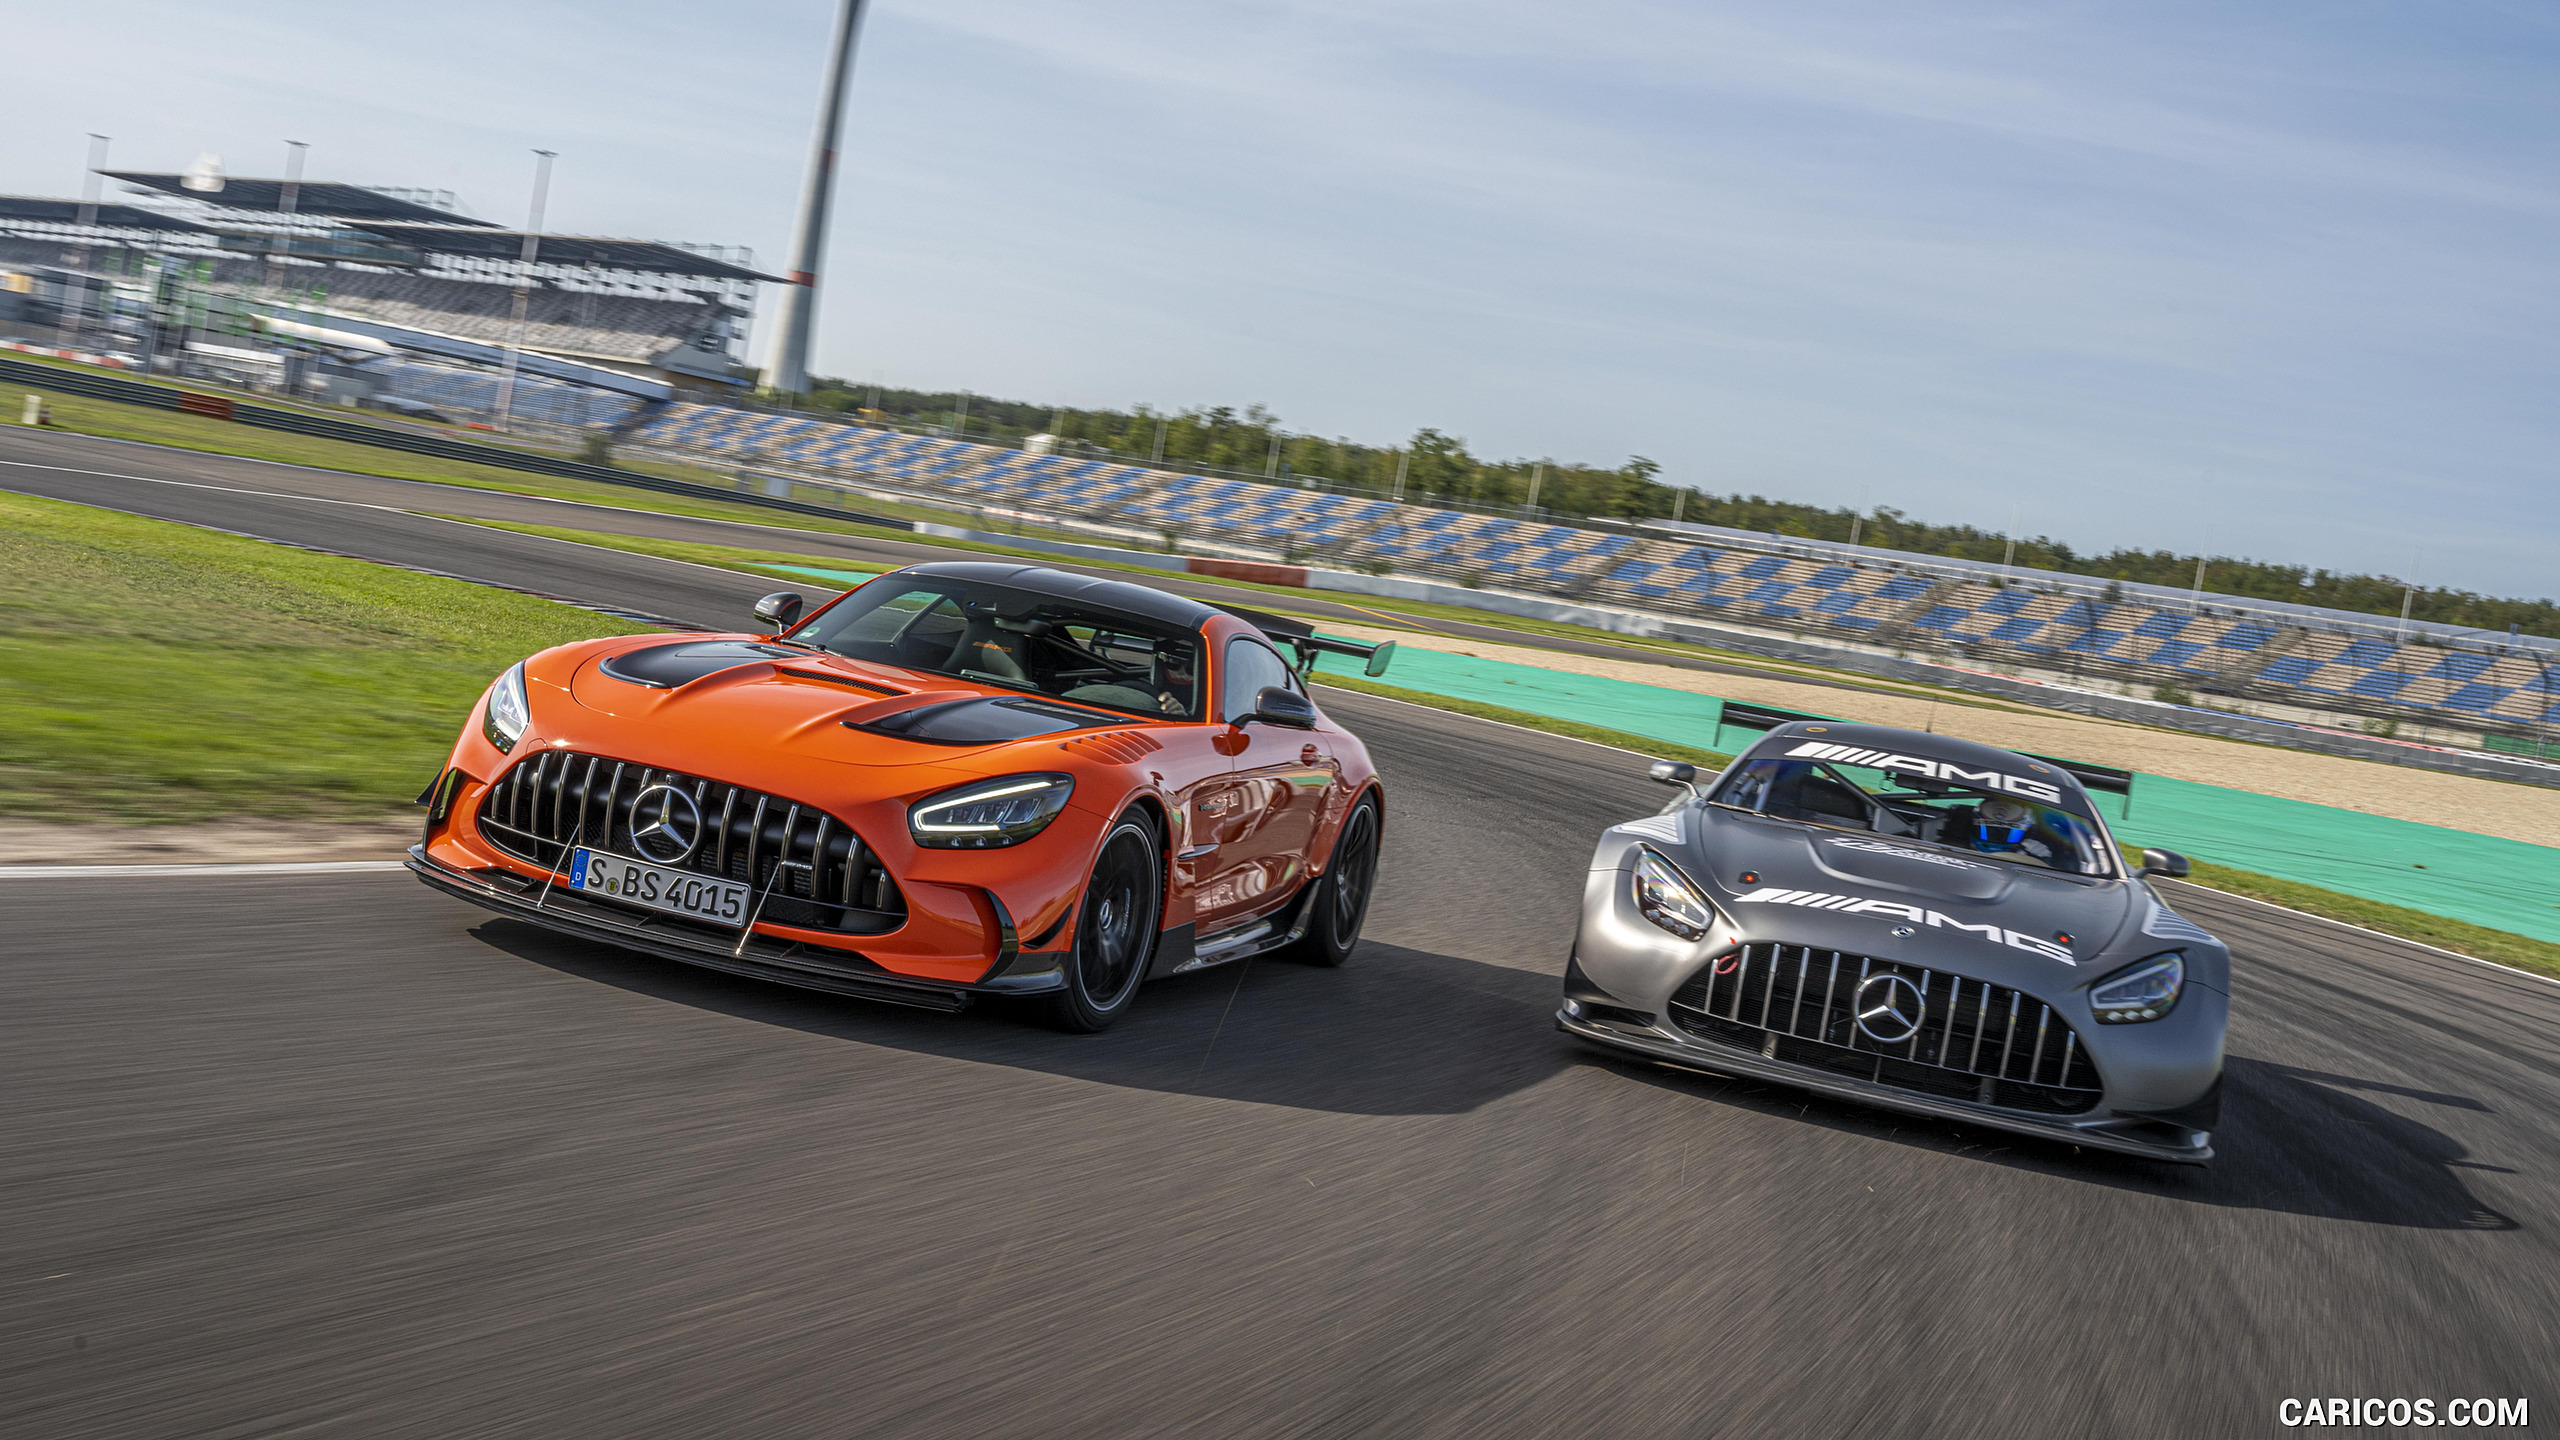 2021 Mercedes-AMG GT Black Series (Color: Magma Beam) and AMG GT3 Racing Car, #137 of 215